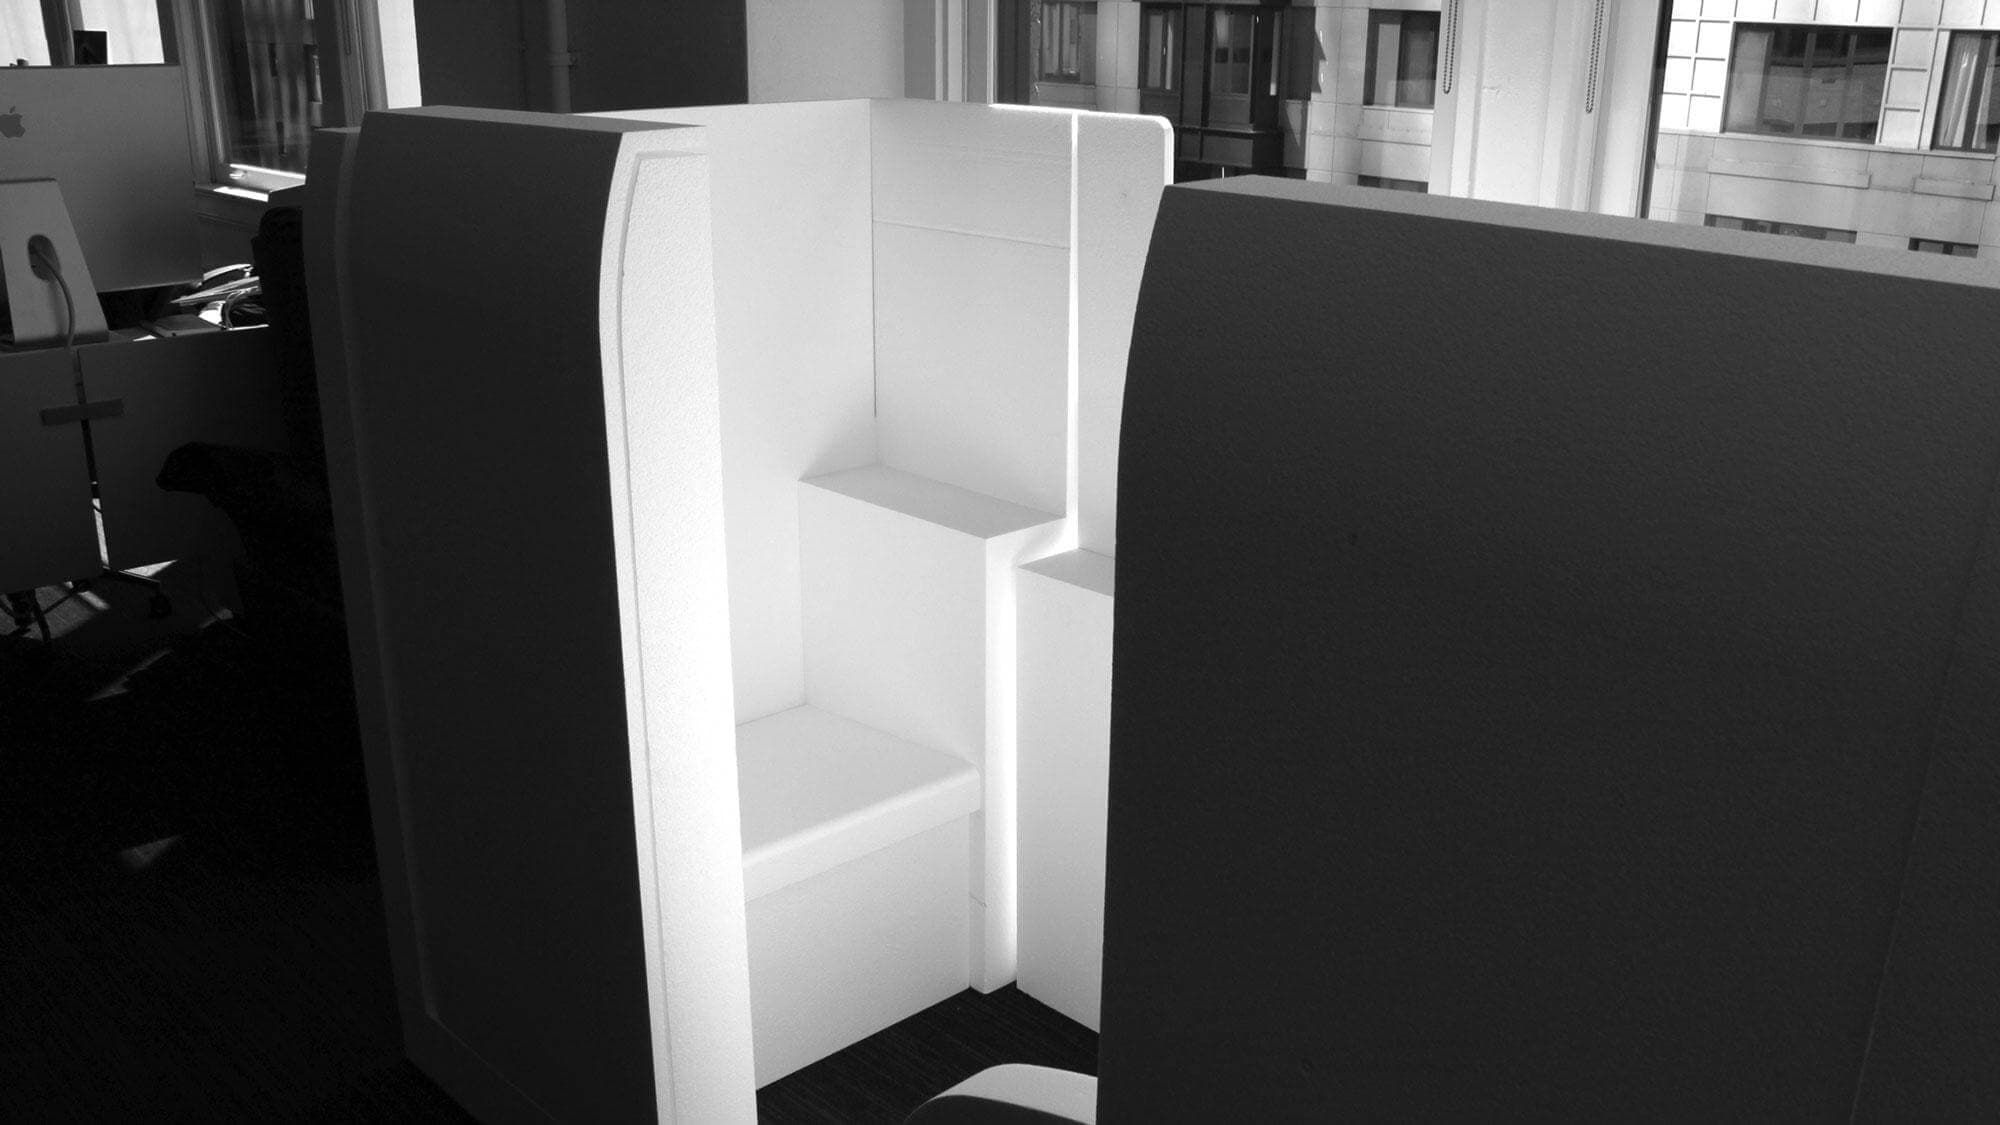 Airline First Class suite mockup